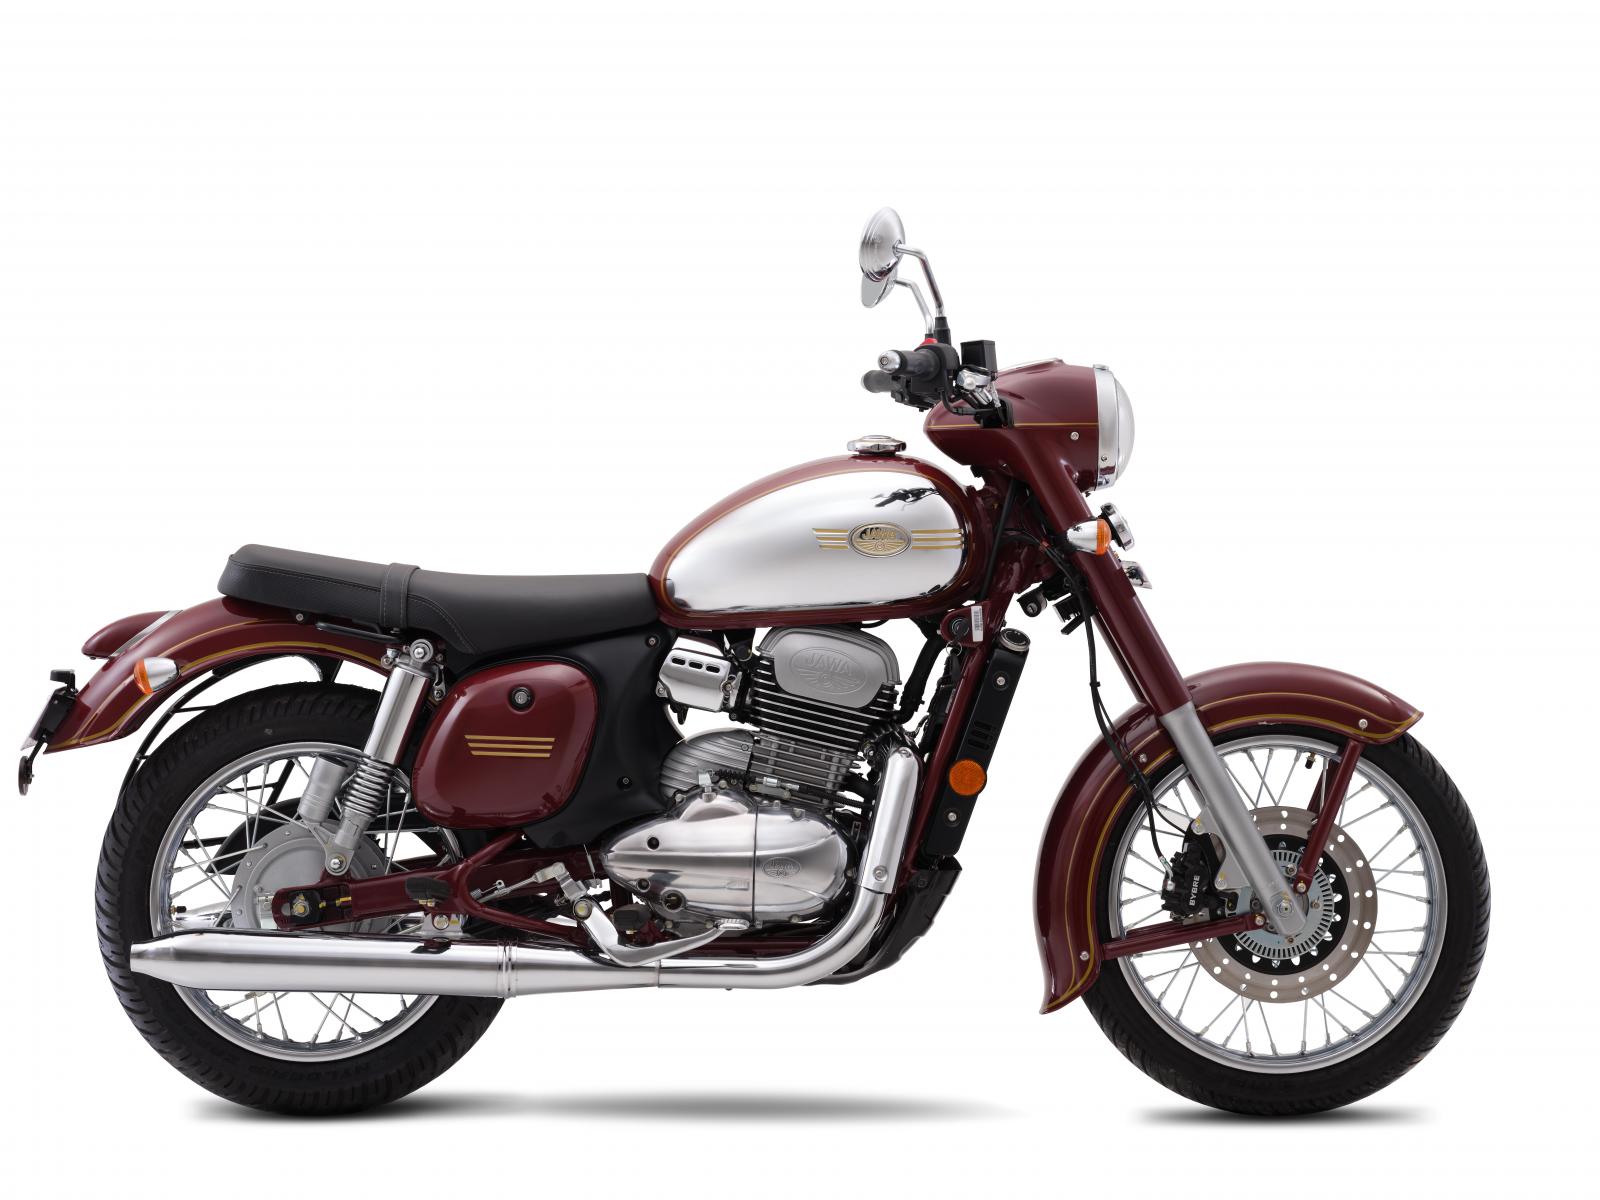 Over 50,000 Jawa motorcycles sold in 12 months of full operations in India